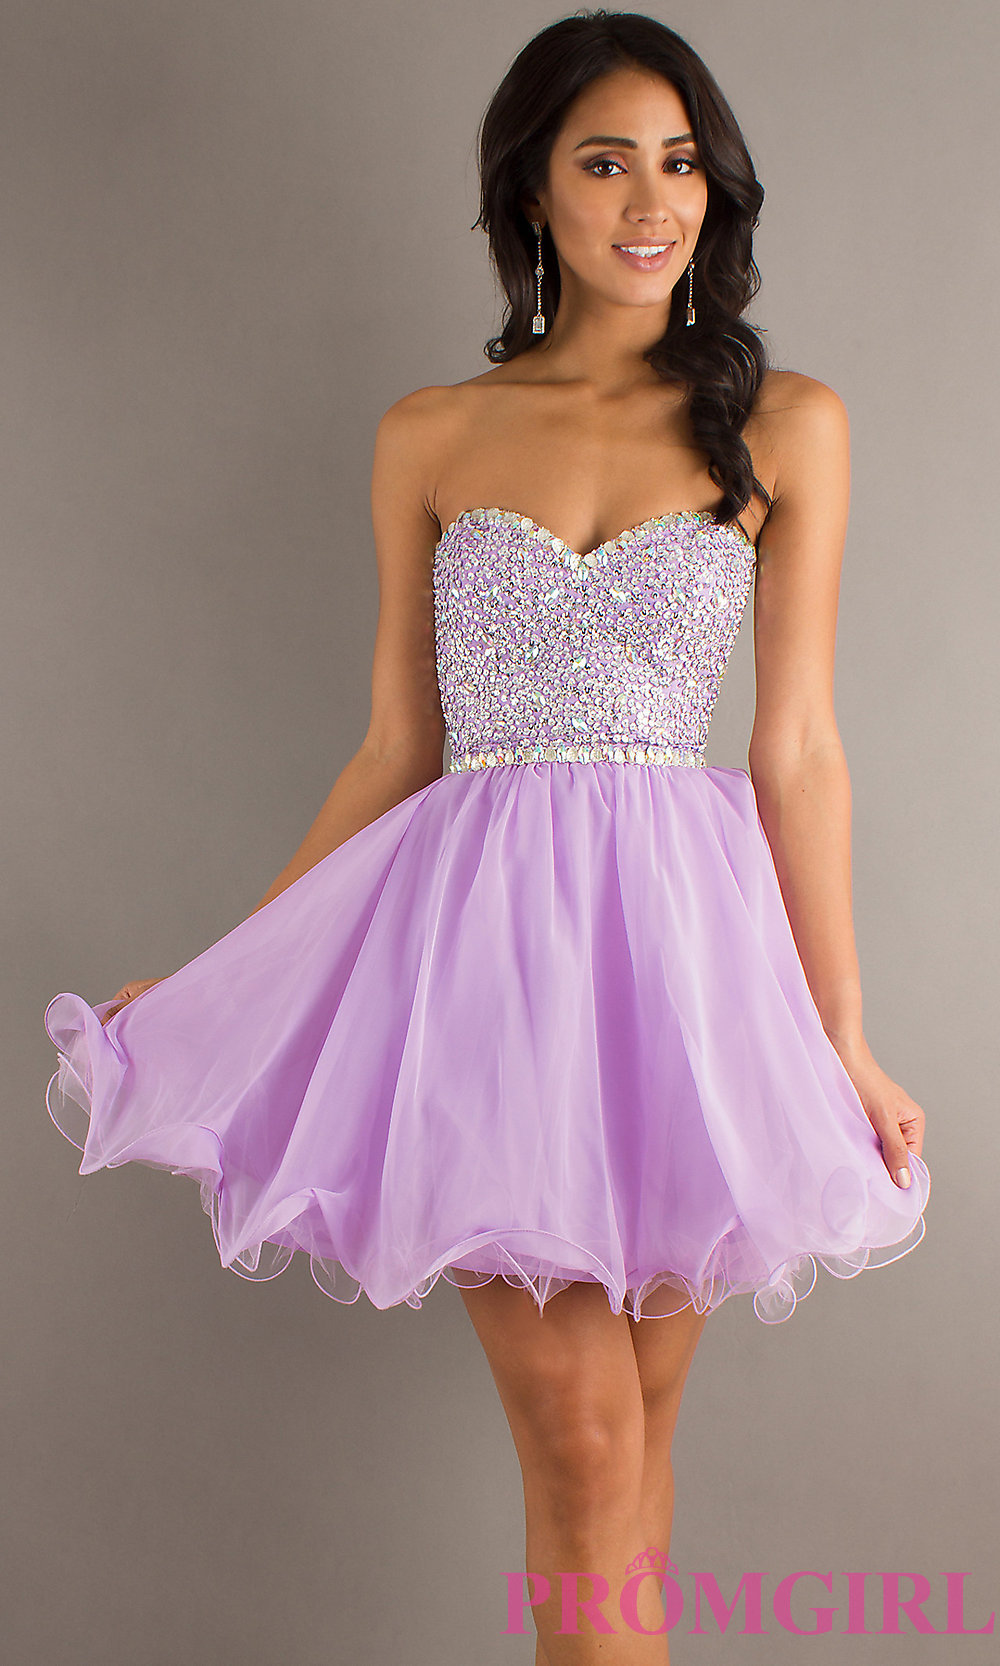 Short Prom Dresses For Girls - How To Get Attention